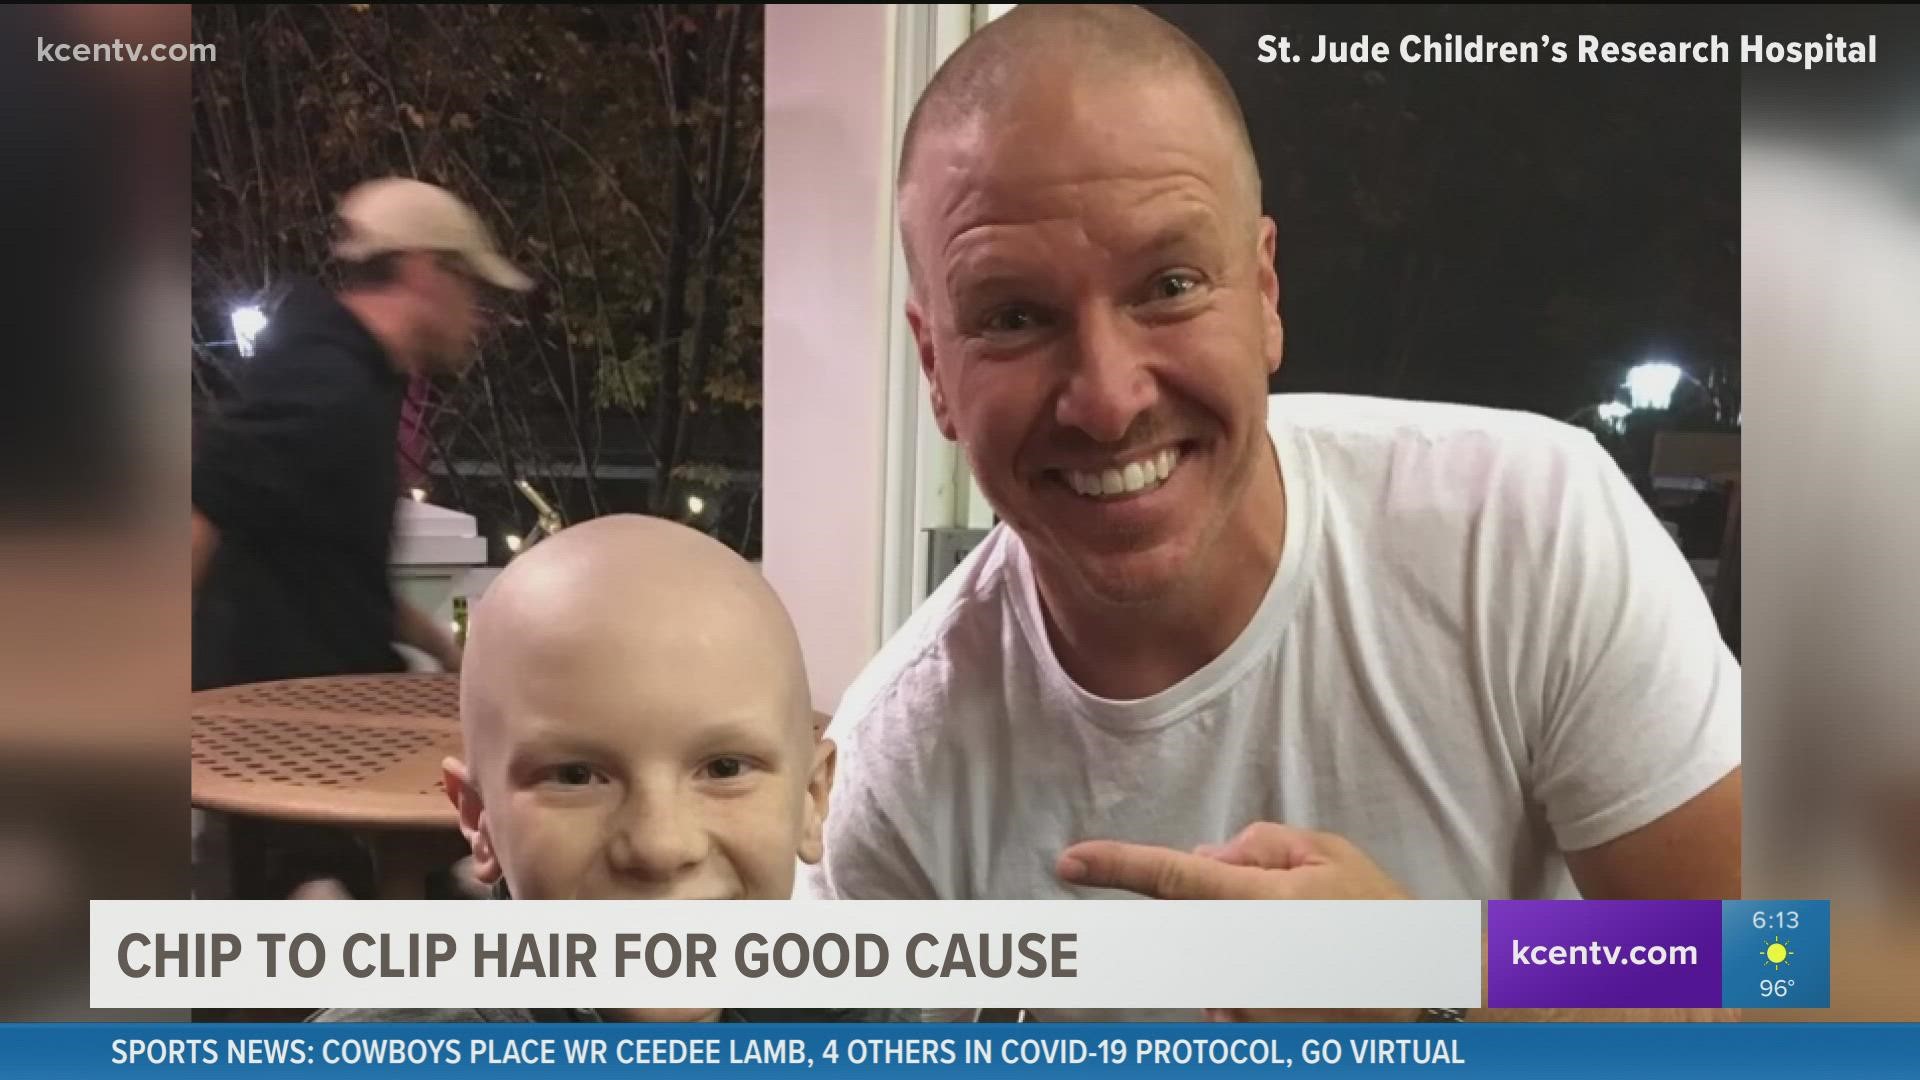 Chip Gaines will cut his hair to be donated to children with hair loss and is asking for donations to benefit St. Jude Children's Research Hospital.